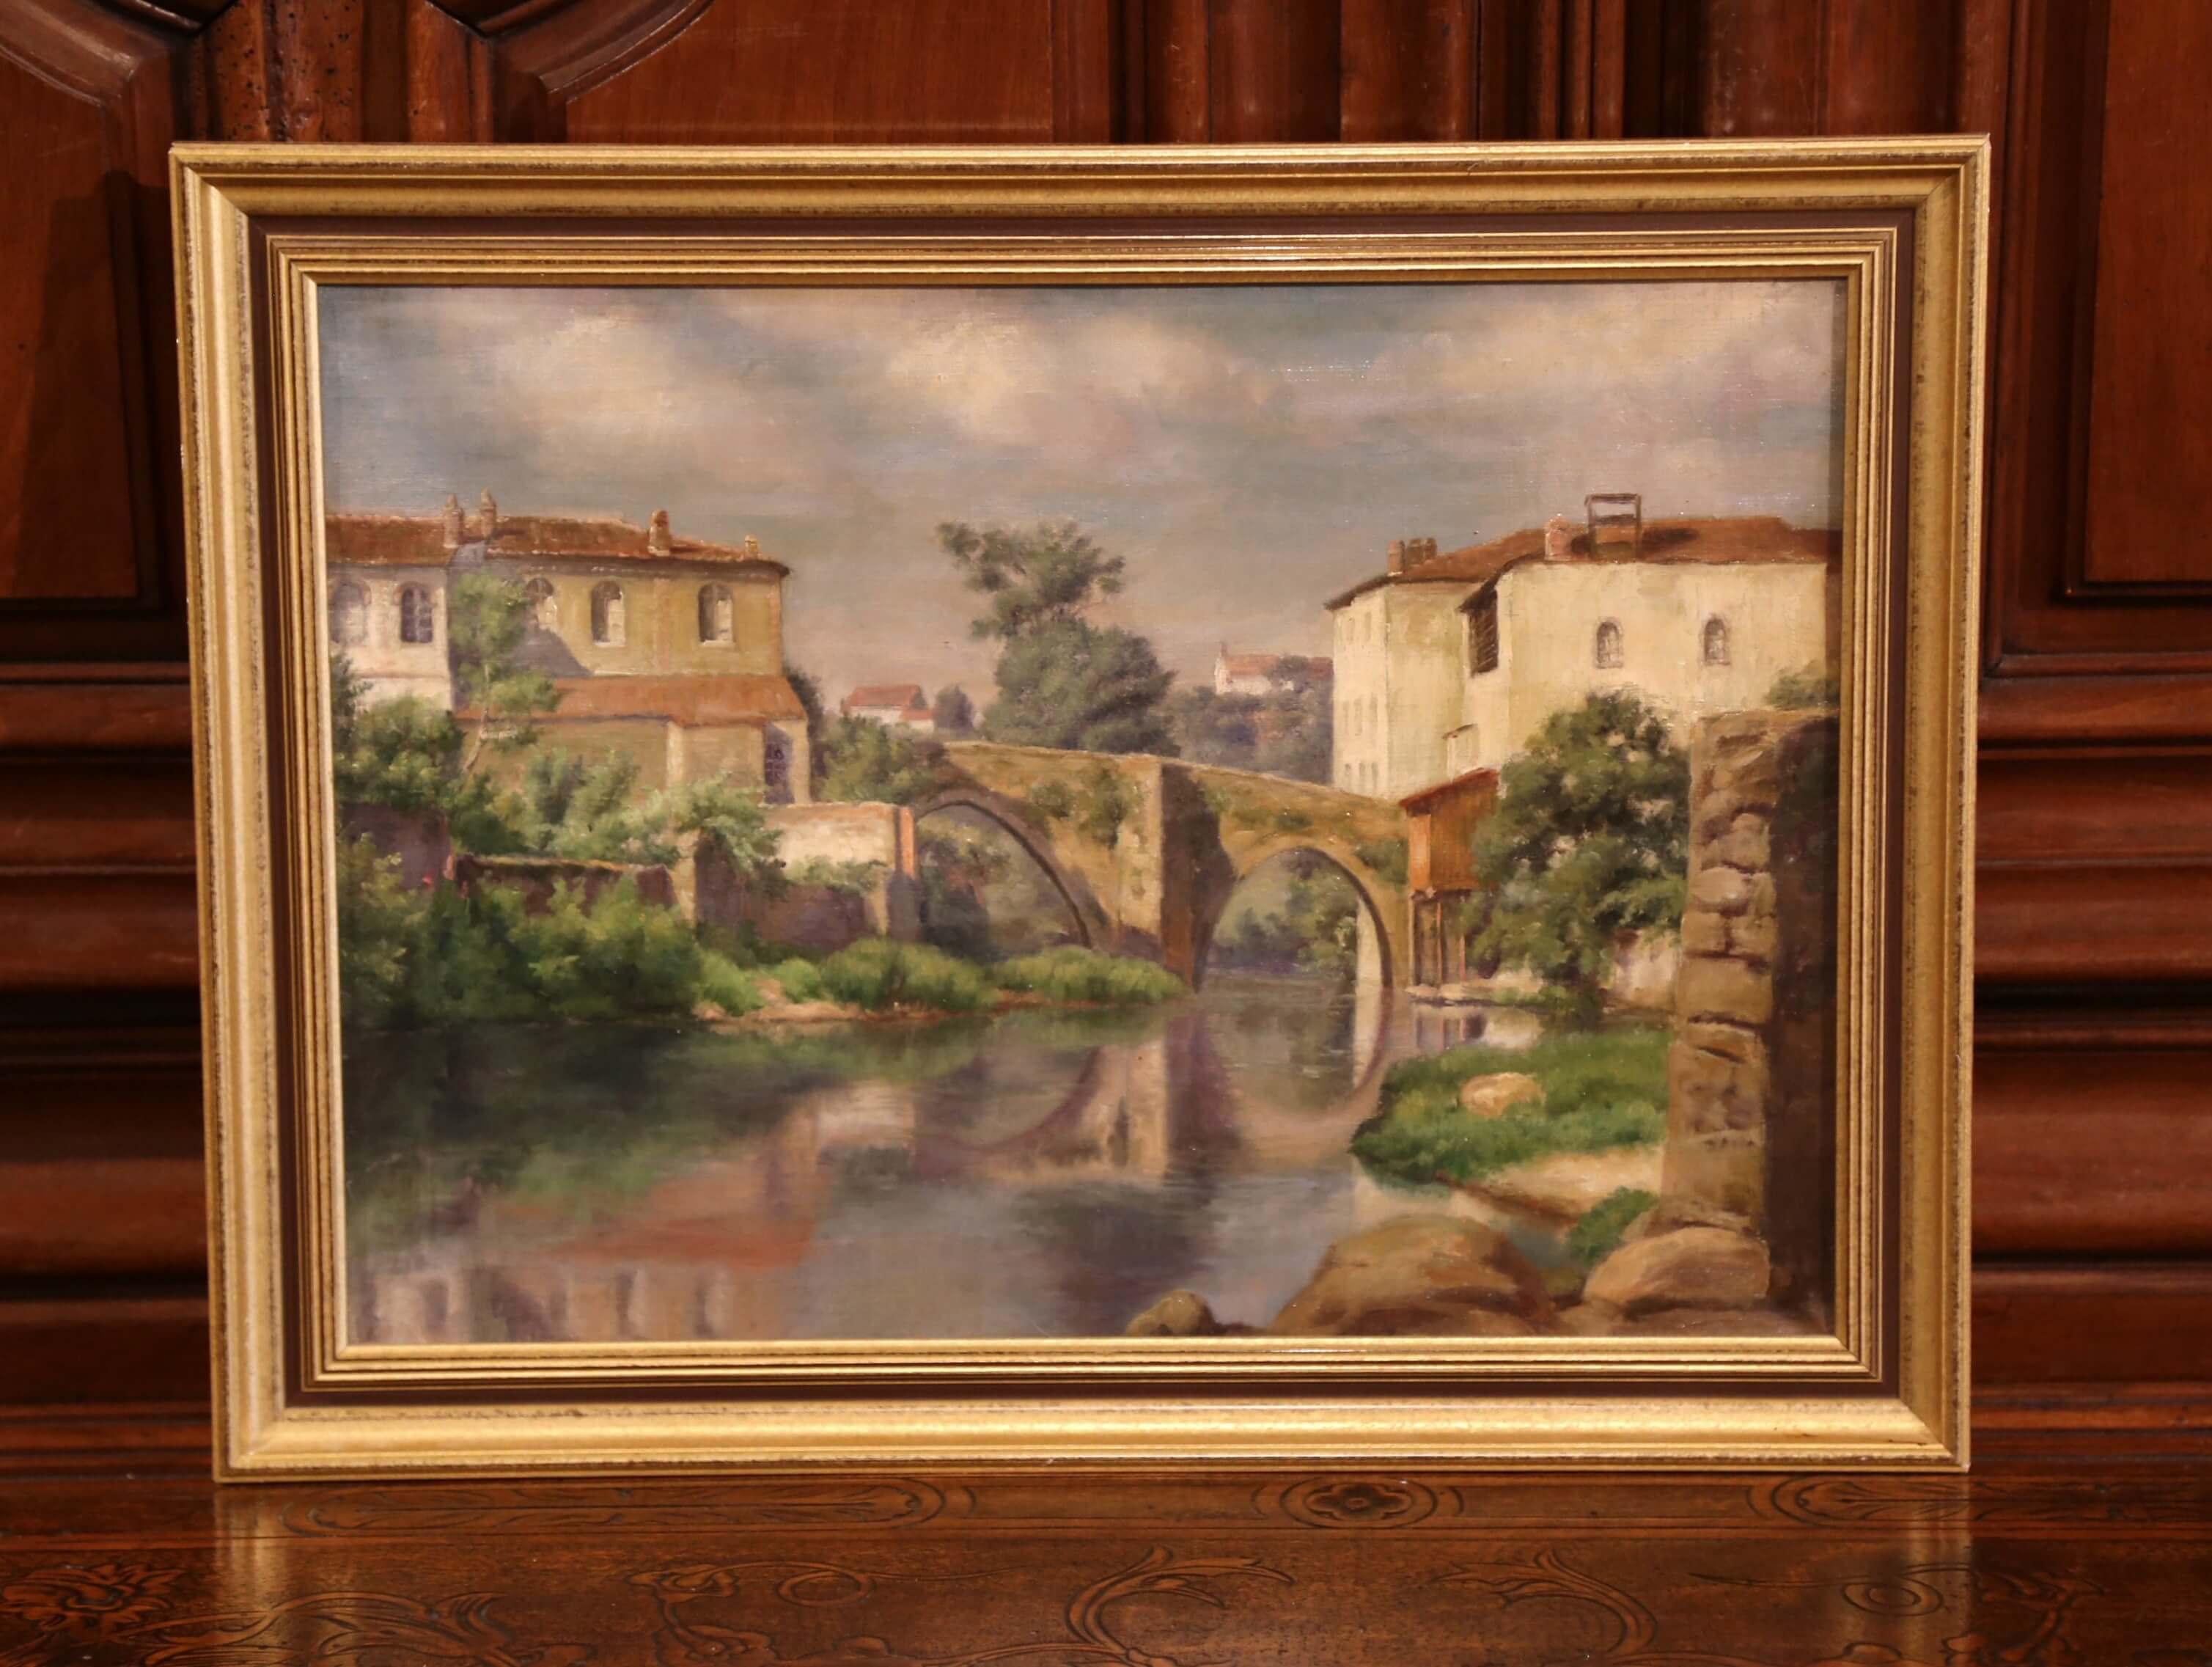 Hand-Painted Early 20th Century Village in Provence Oil on Canvas Painting in Gilt Frame